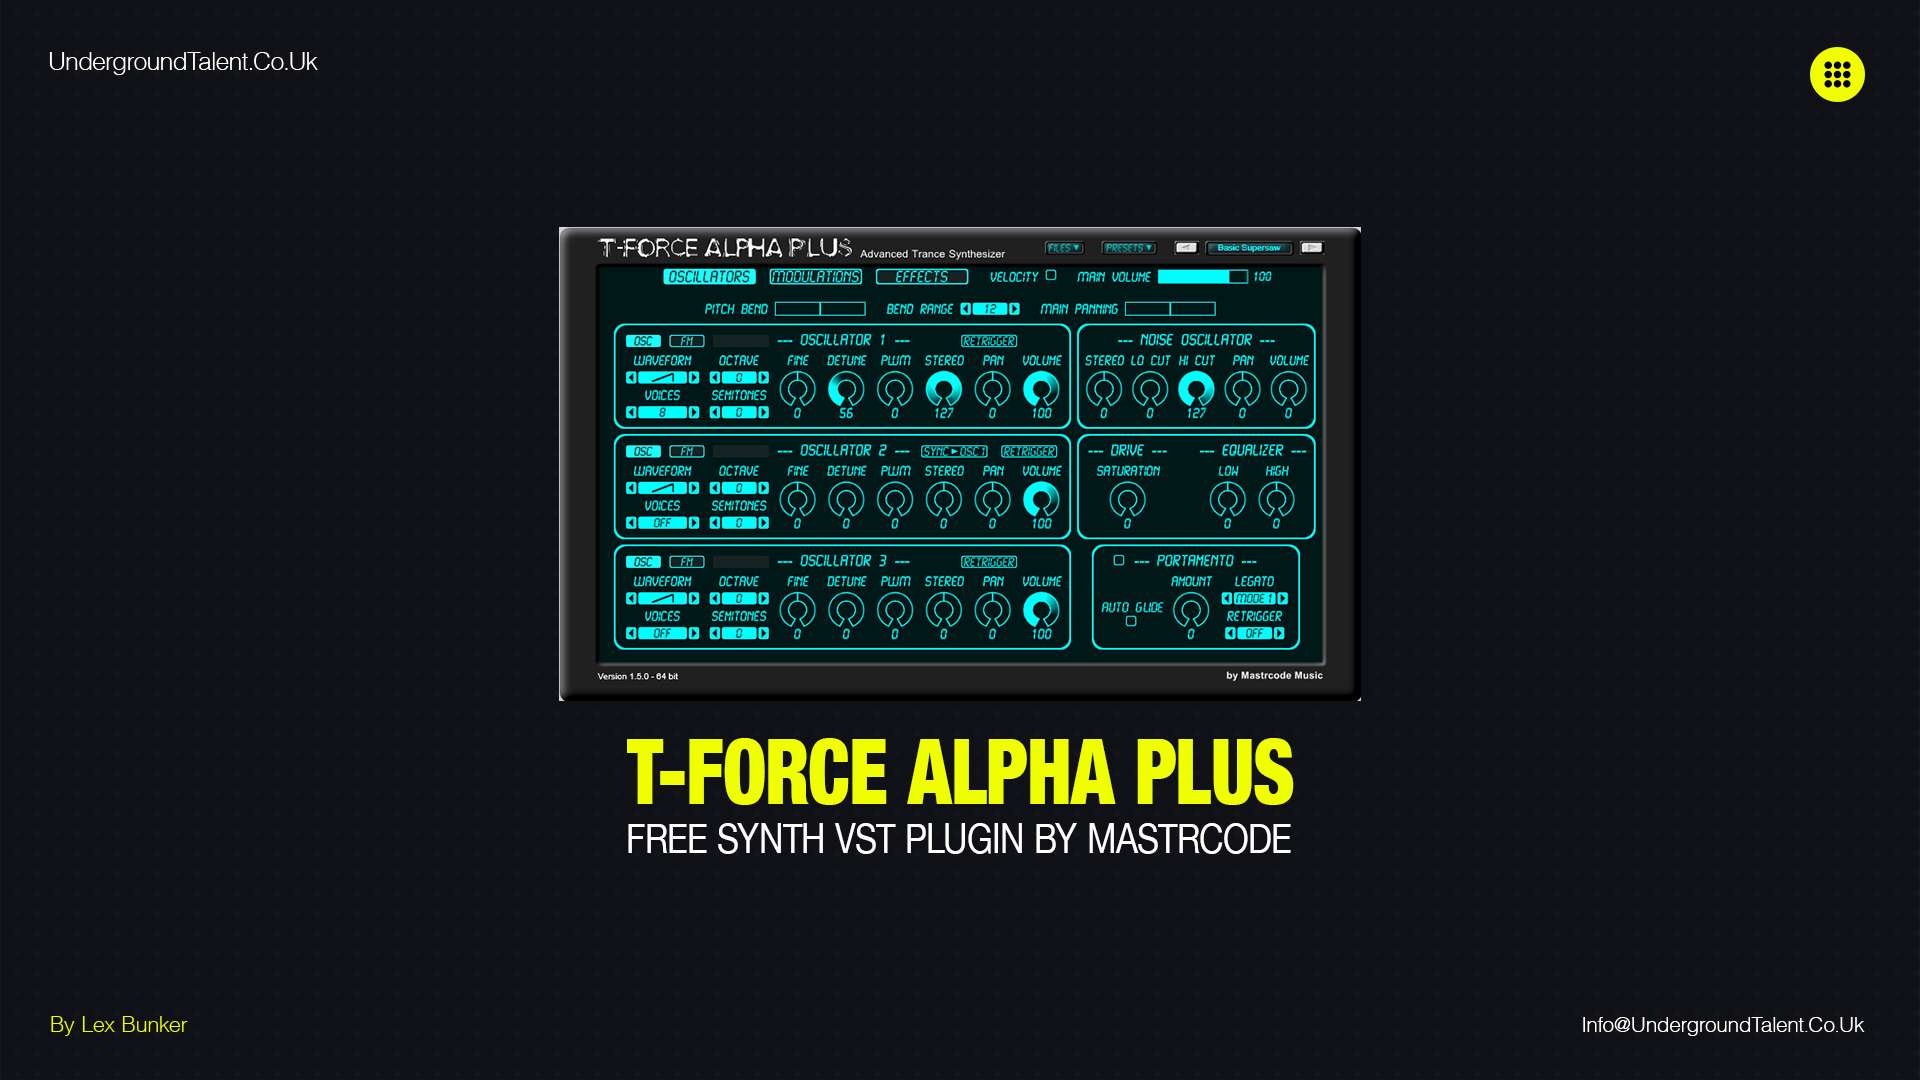 T-Force Alpha Plus by Mastrcode: Free Synth VST Plugin